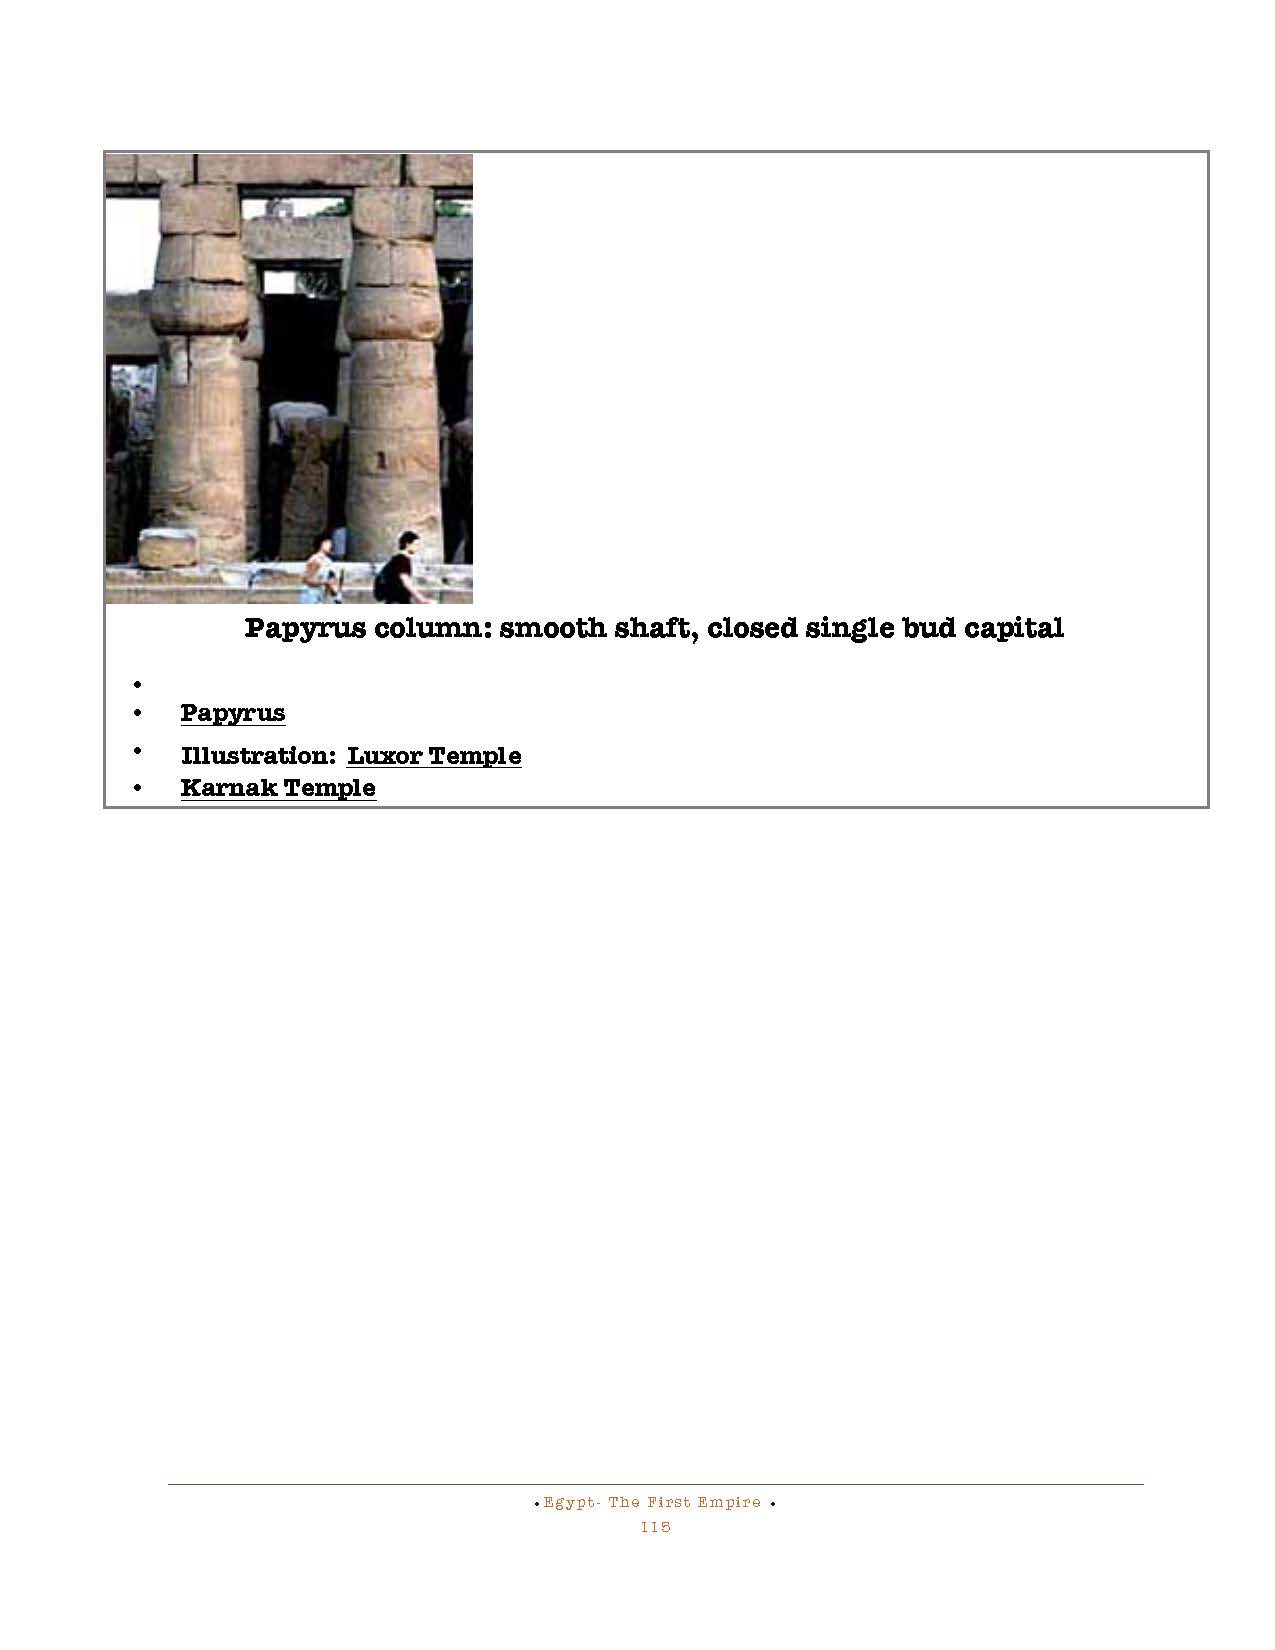 HOCE- Egypt  (First Empire) Notes_Page_115.jpg